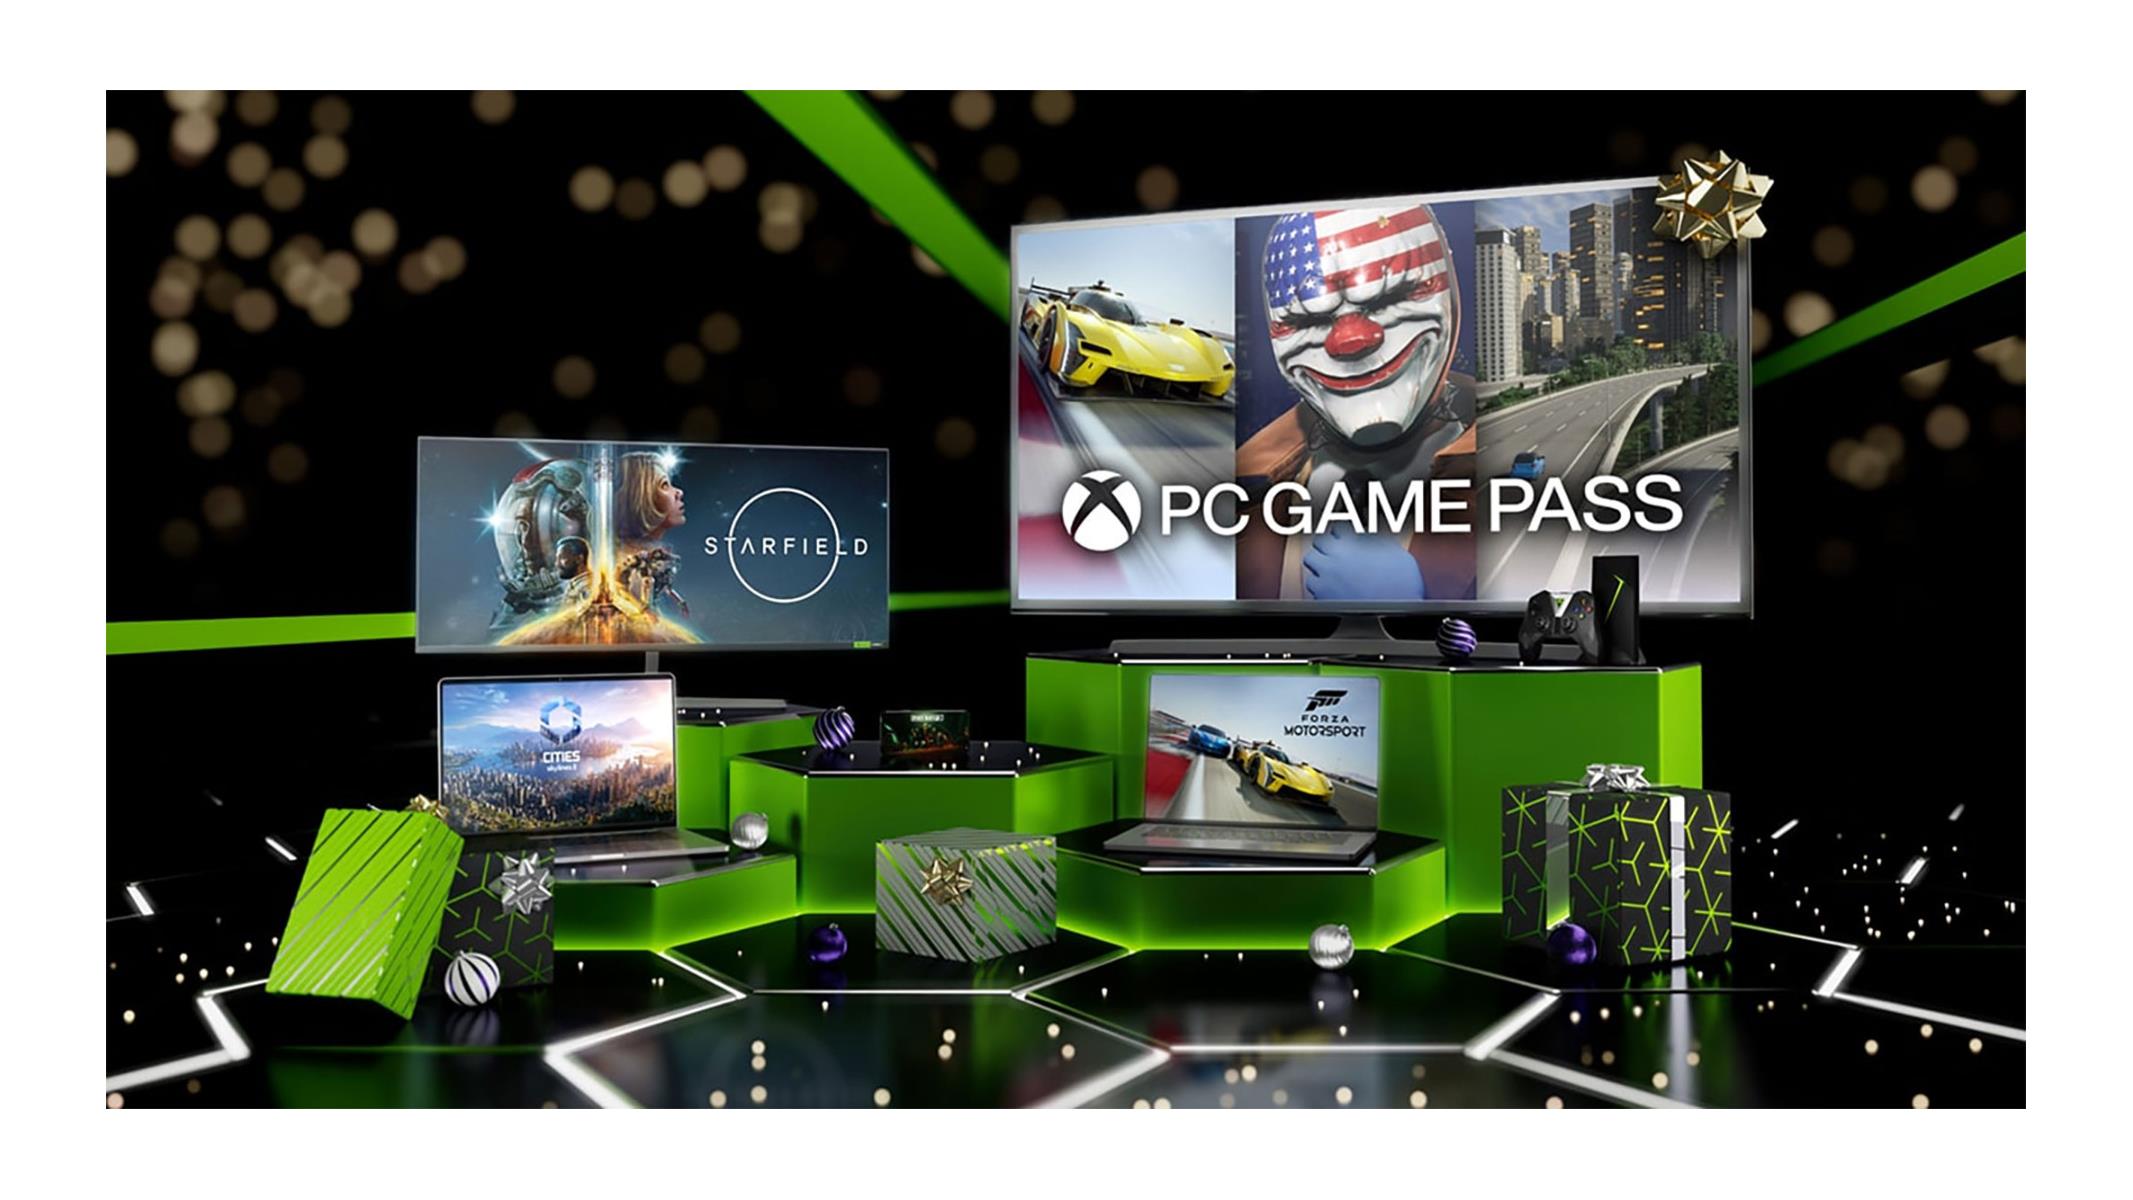 GeForce Now PC Game Pass Support Means You Don't Even Need A PC - GameSpot